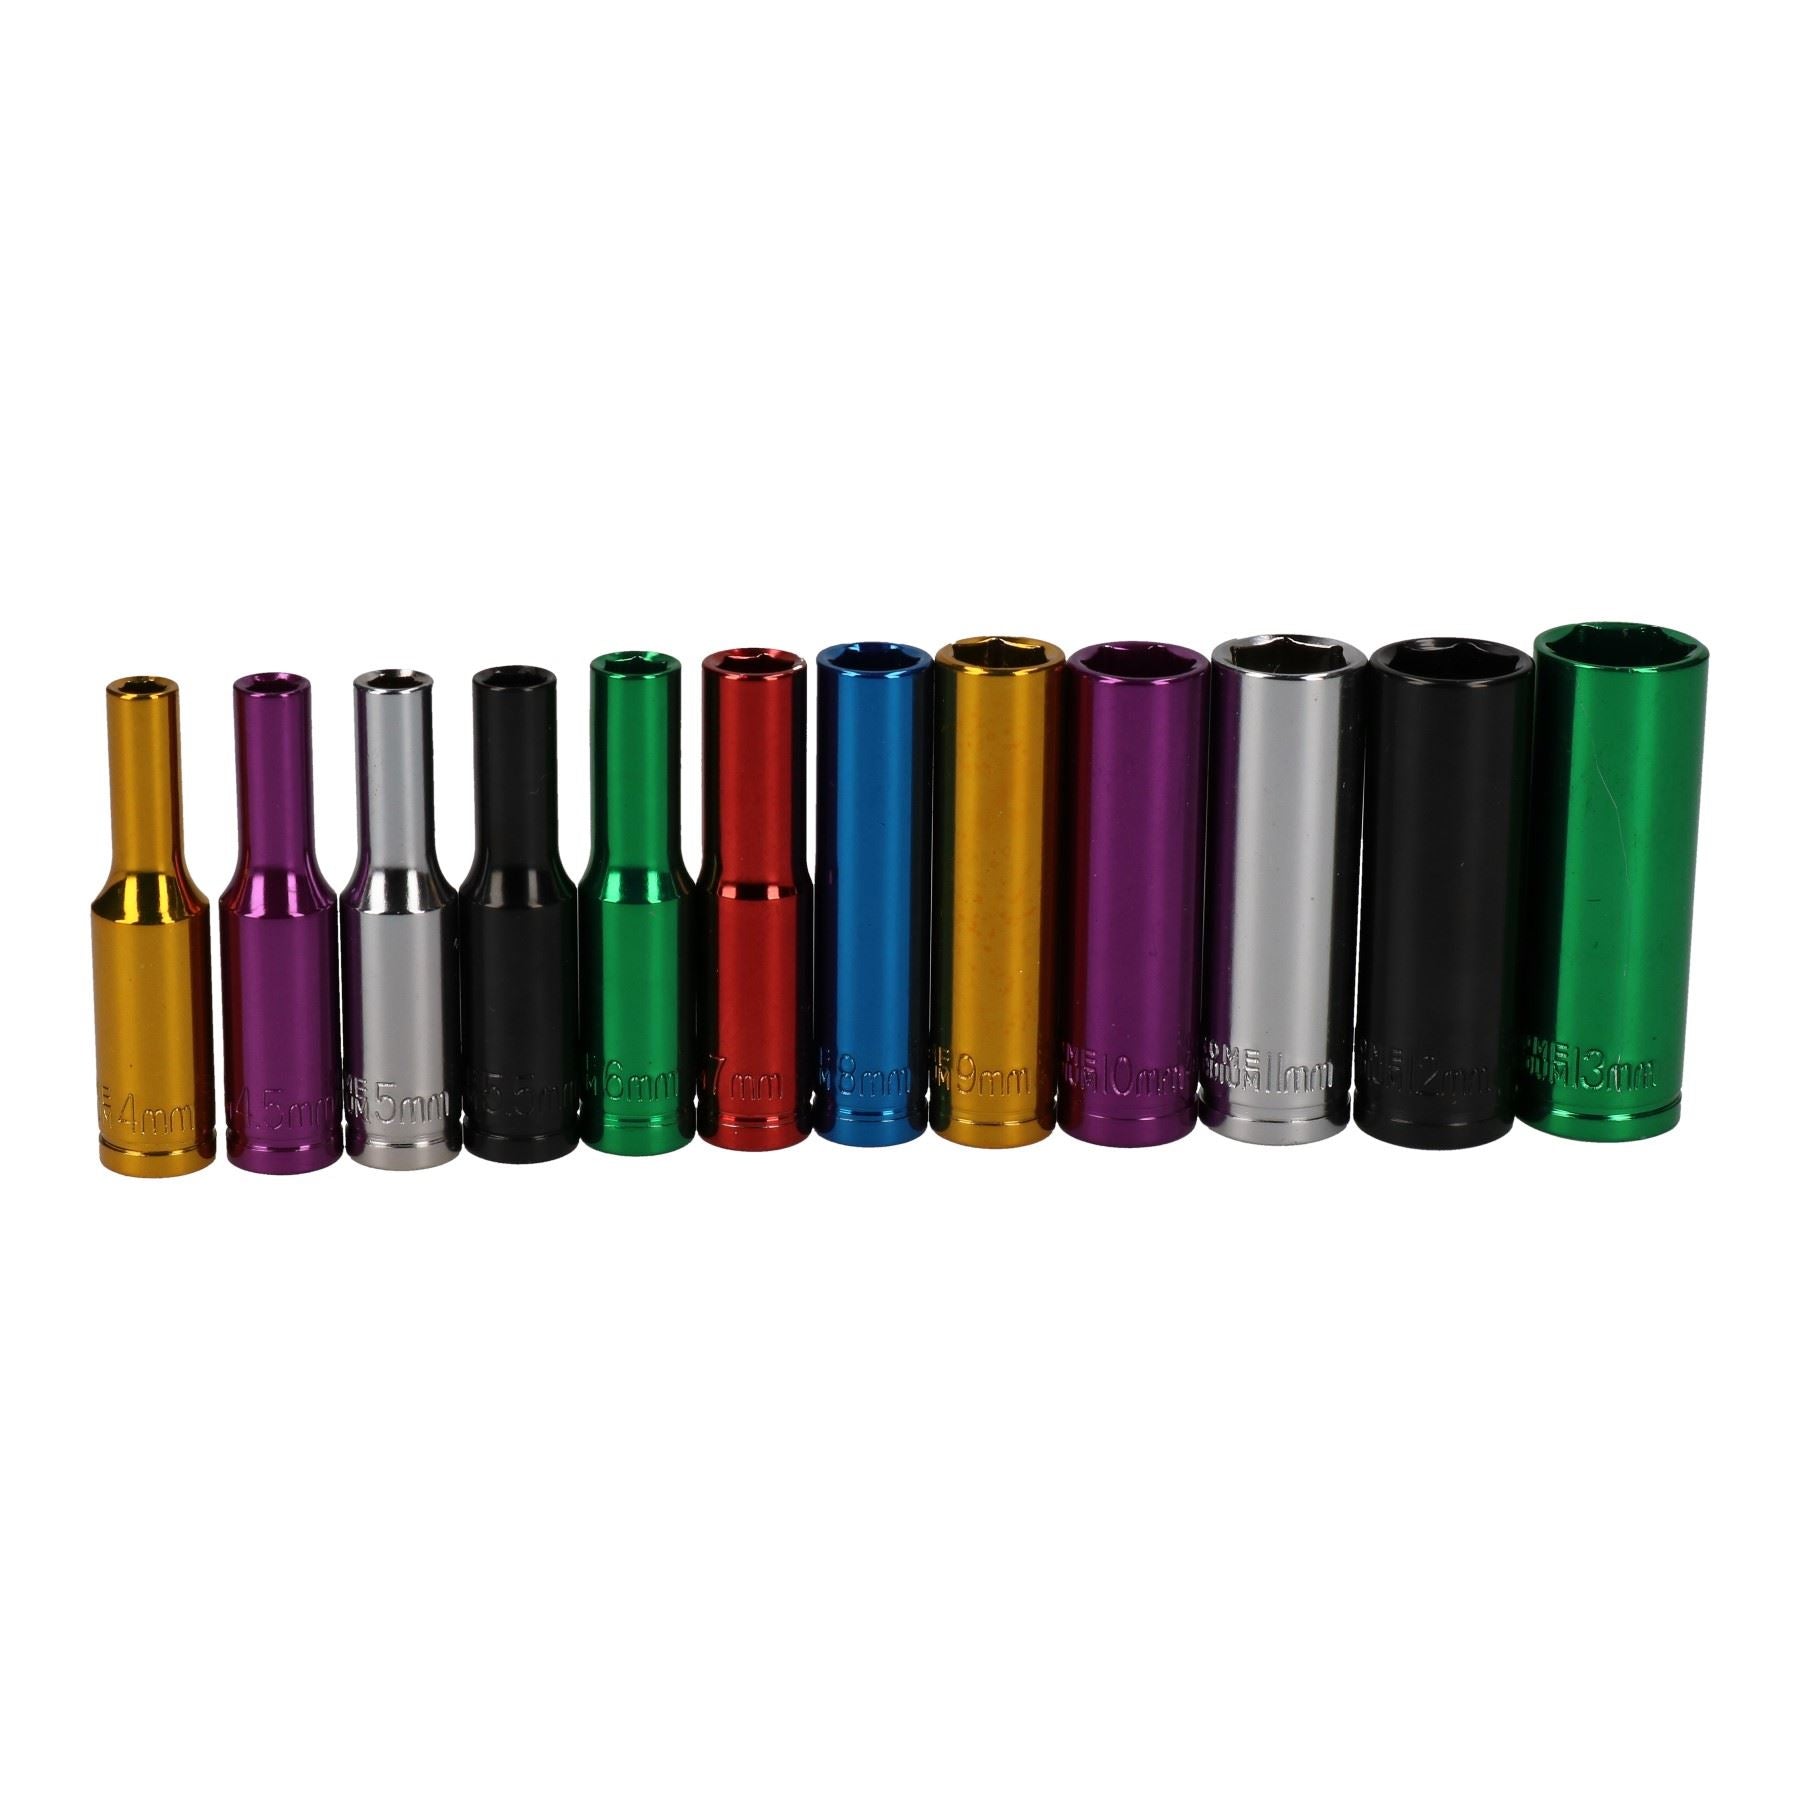 12pc Coloured 1/4" Dr Deep Sockets 6 Point Hex Metric 4 - 13mm With Rail